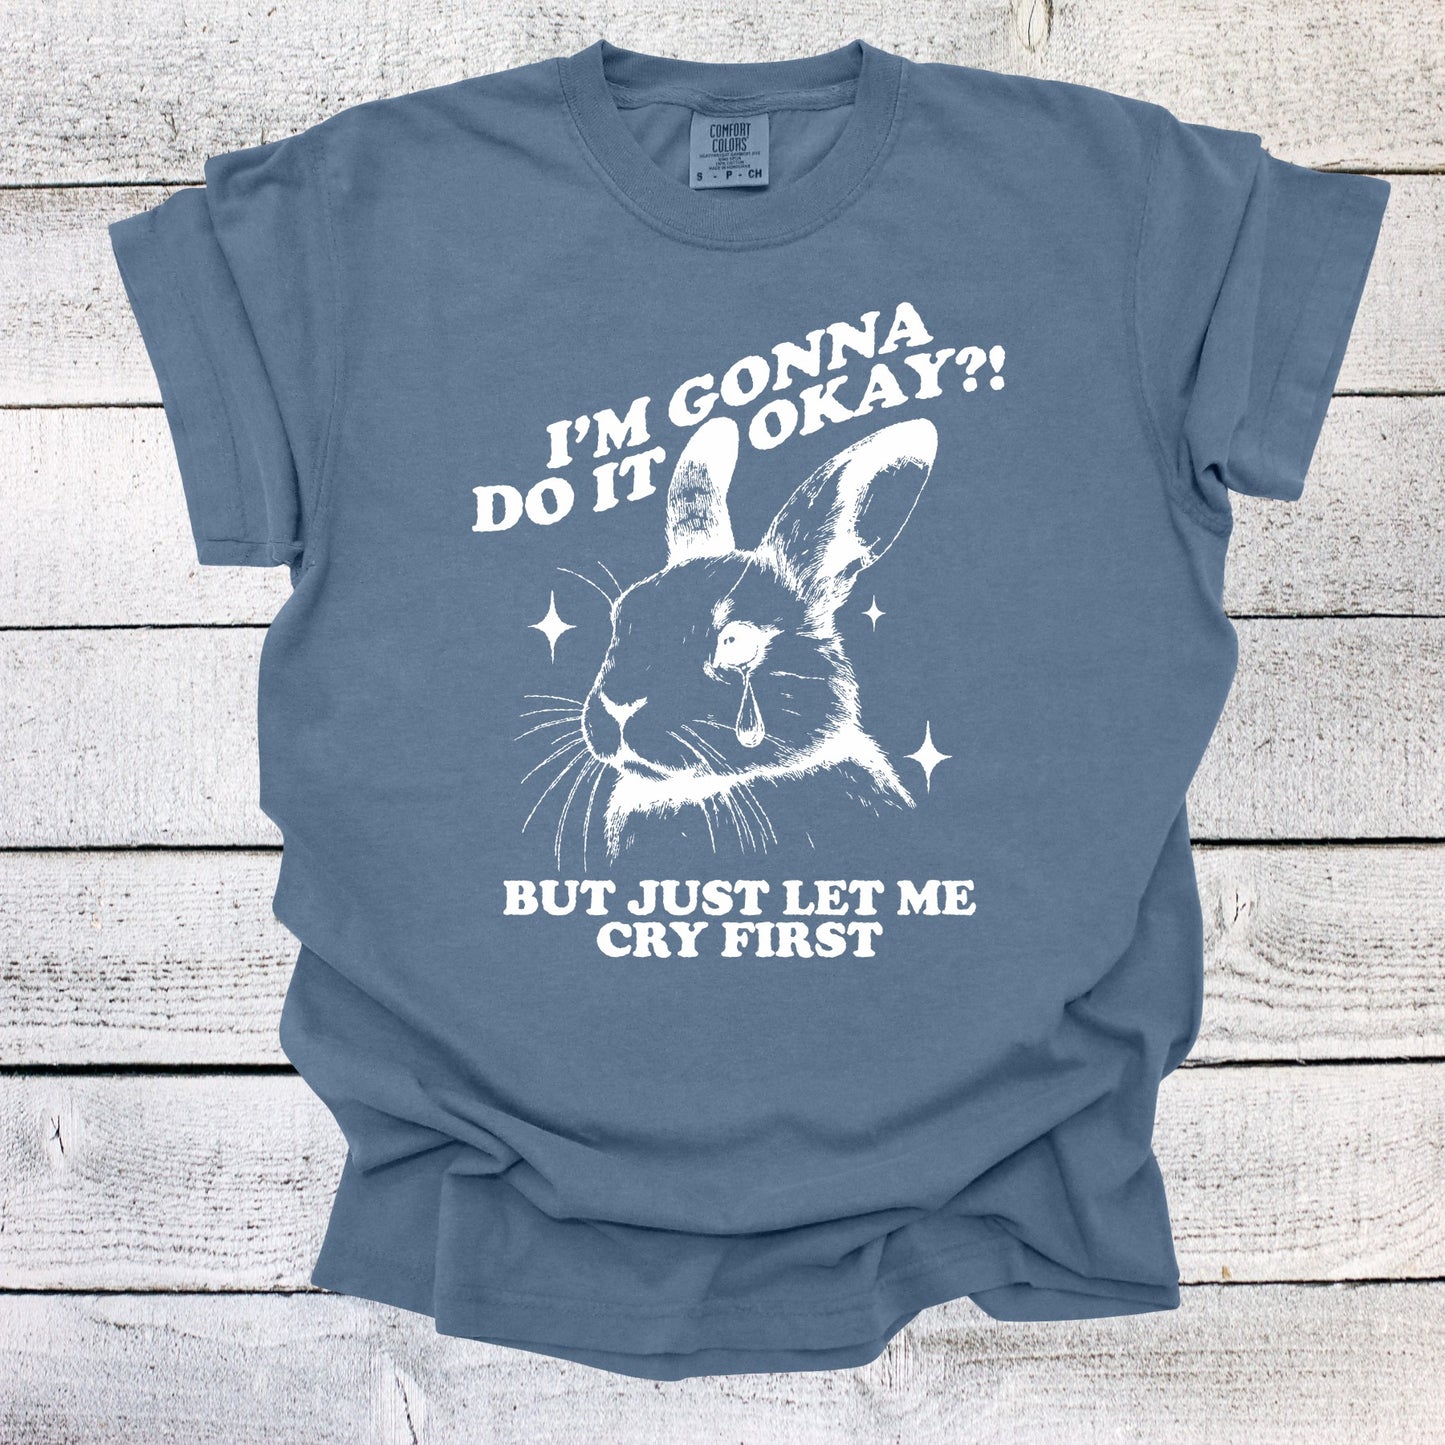 I'm Gonna Do it Okay! But Just Let Me Cry First Shirt